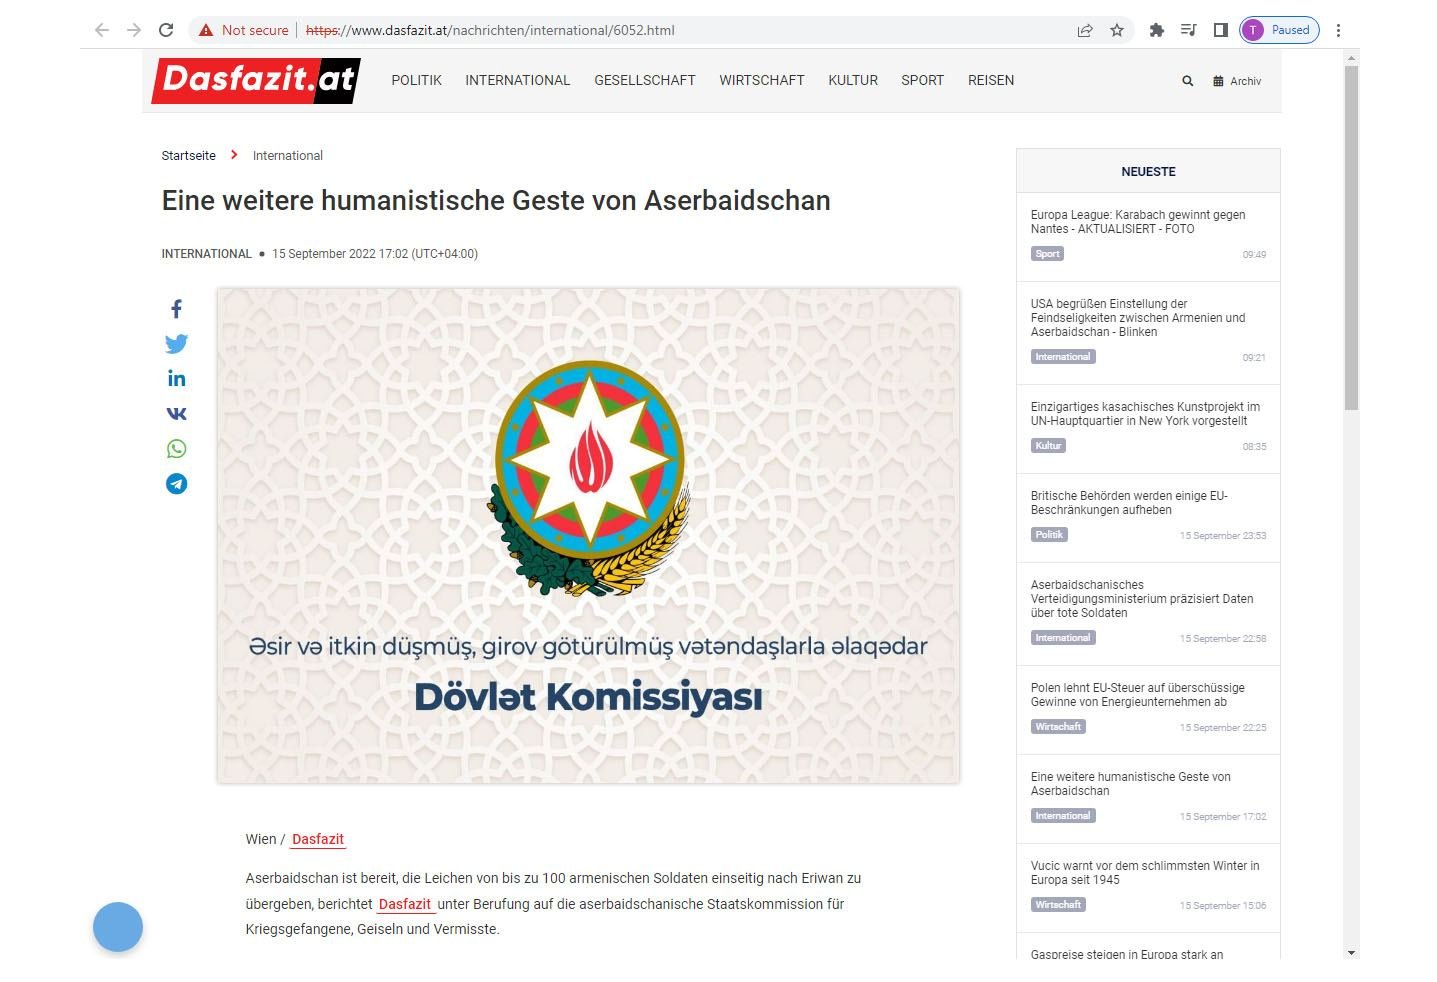 Austrian media reports on another example of Azerbaijani humanism